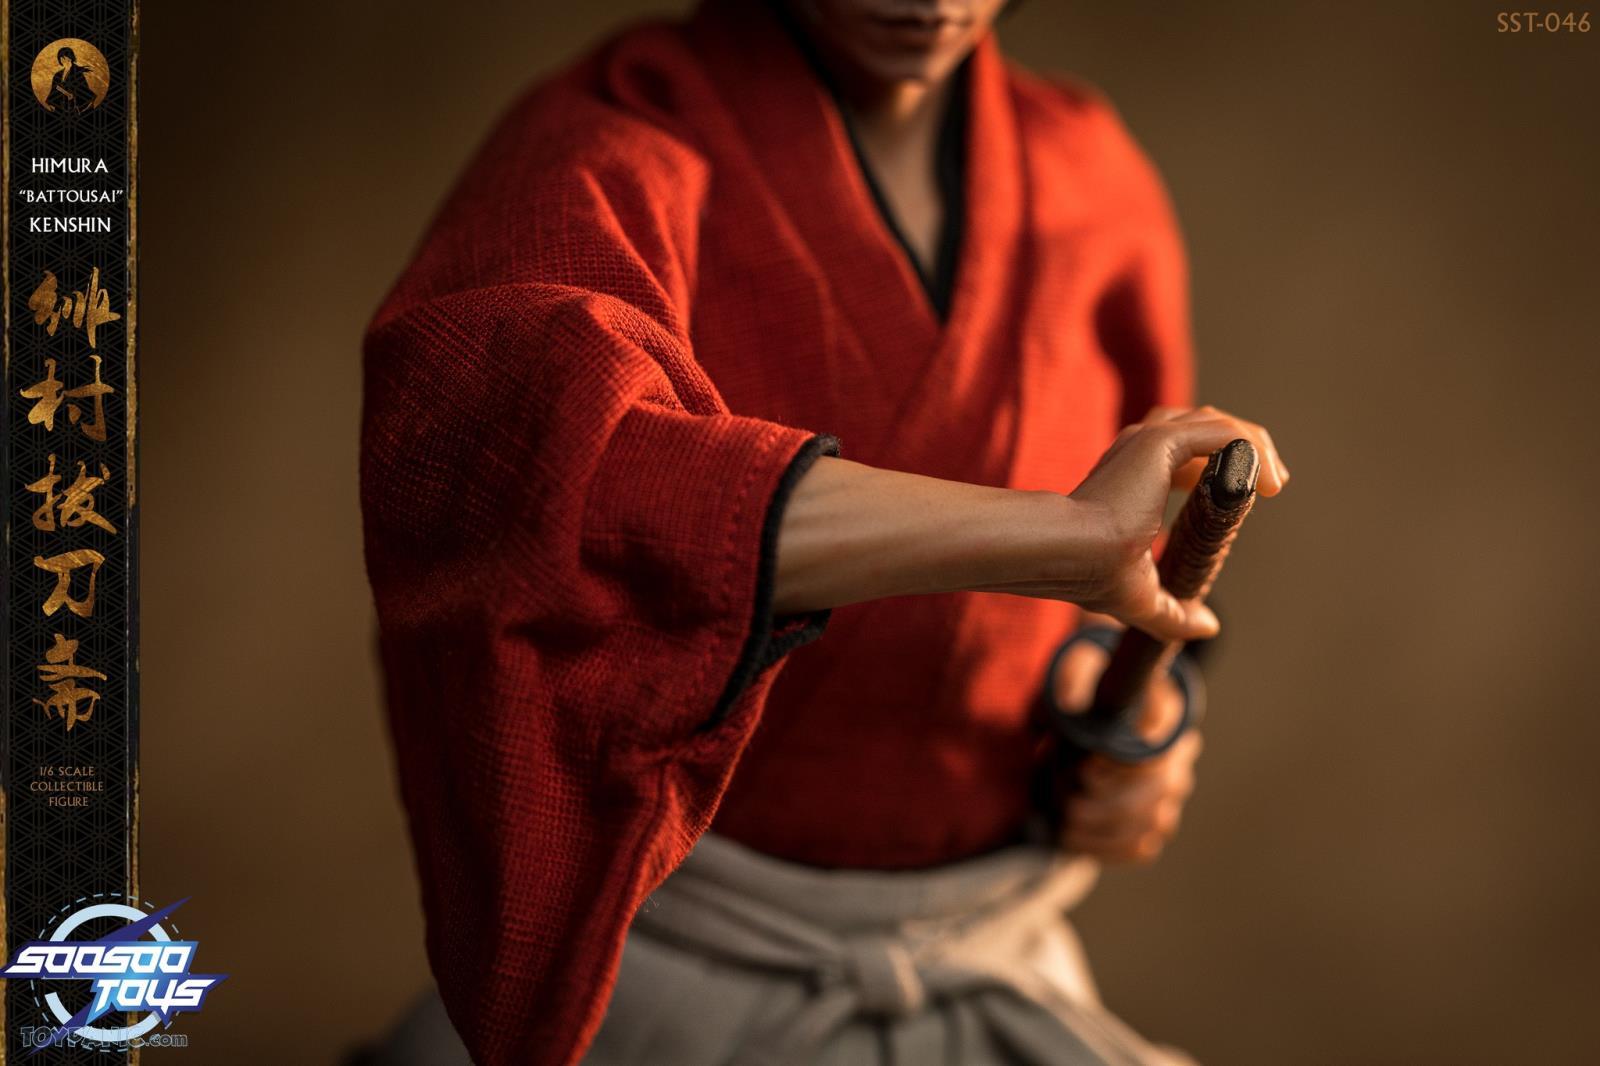 kenshin - NEW PRODUCT: 1/6 scale Rurouni Kenshin Collectible Figure from SooSooToys 712202251230PM_4333714